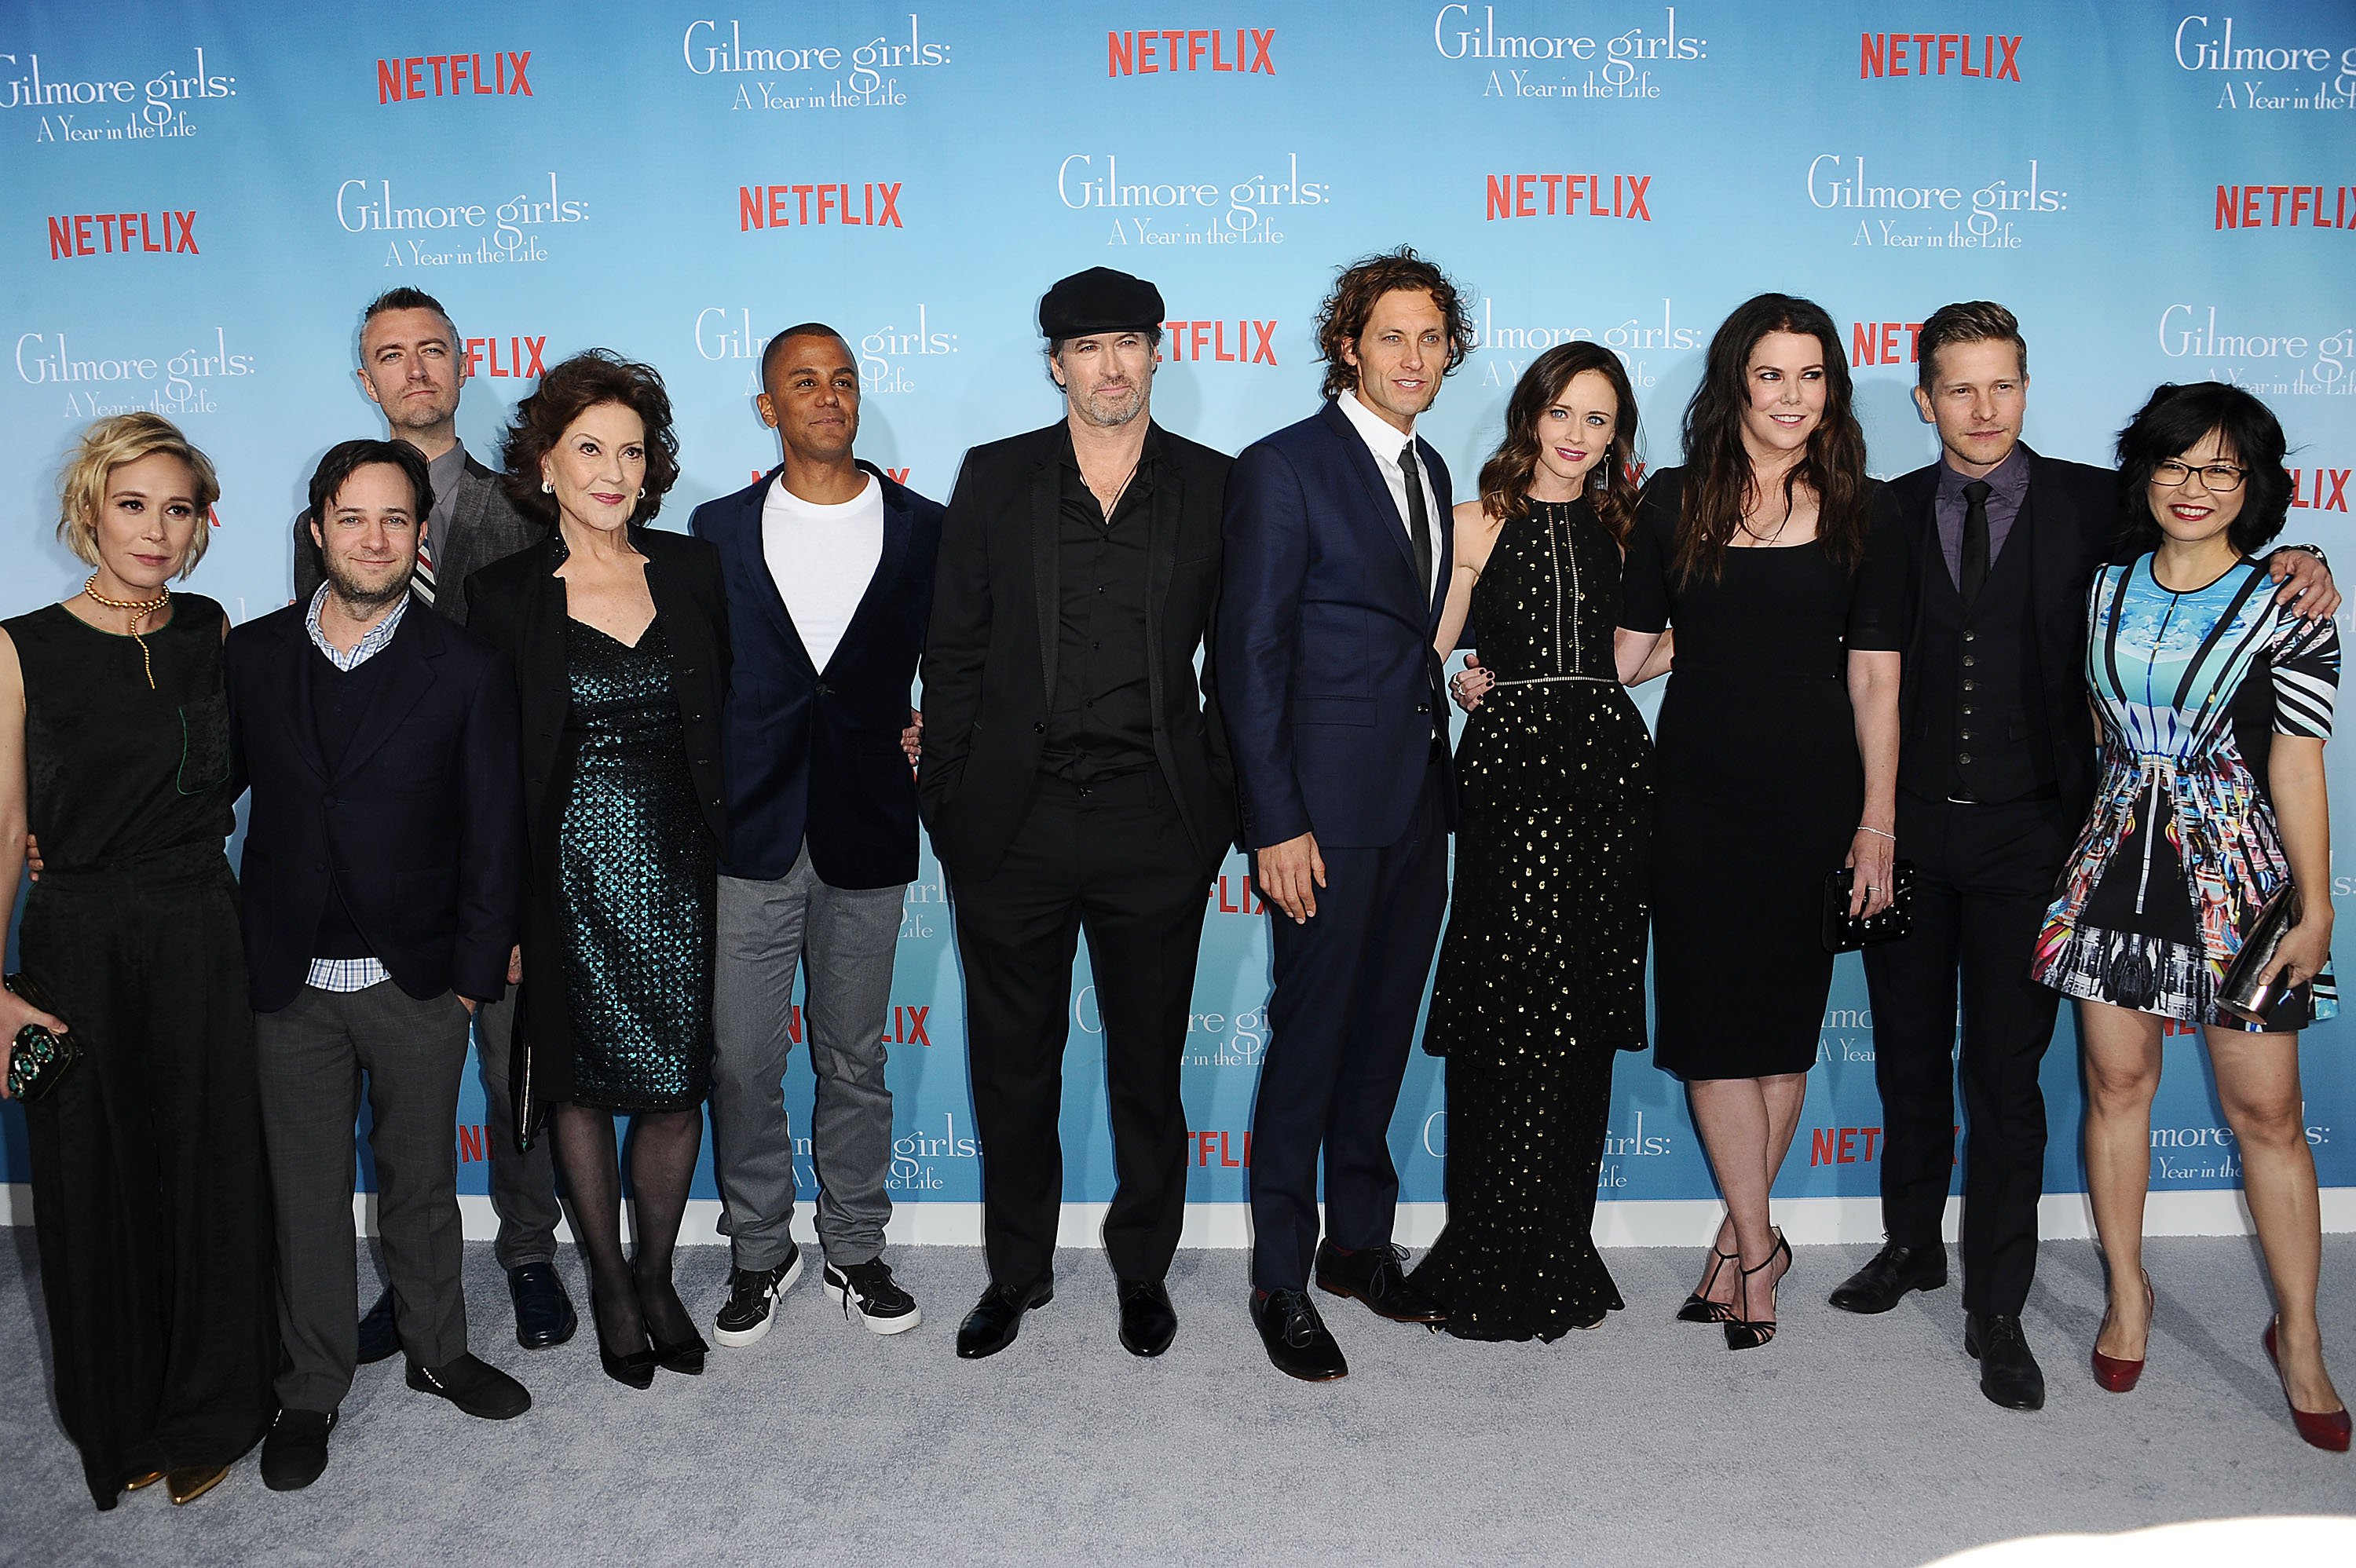 The cast of 'Gilmore Girls: A Year in the Life' attend the premiere in Los Angeles